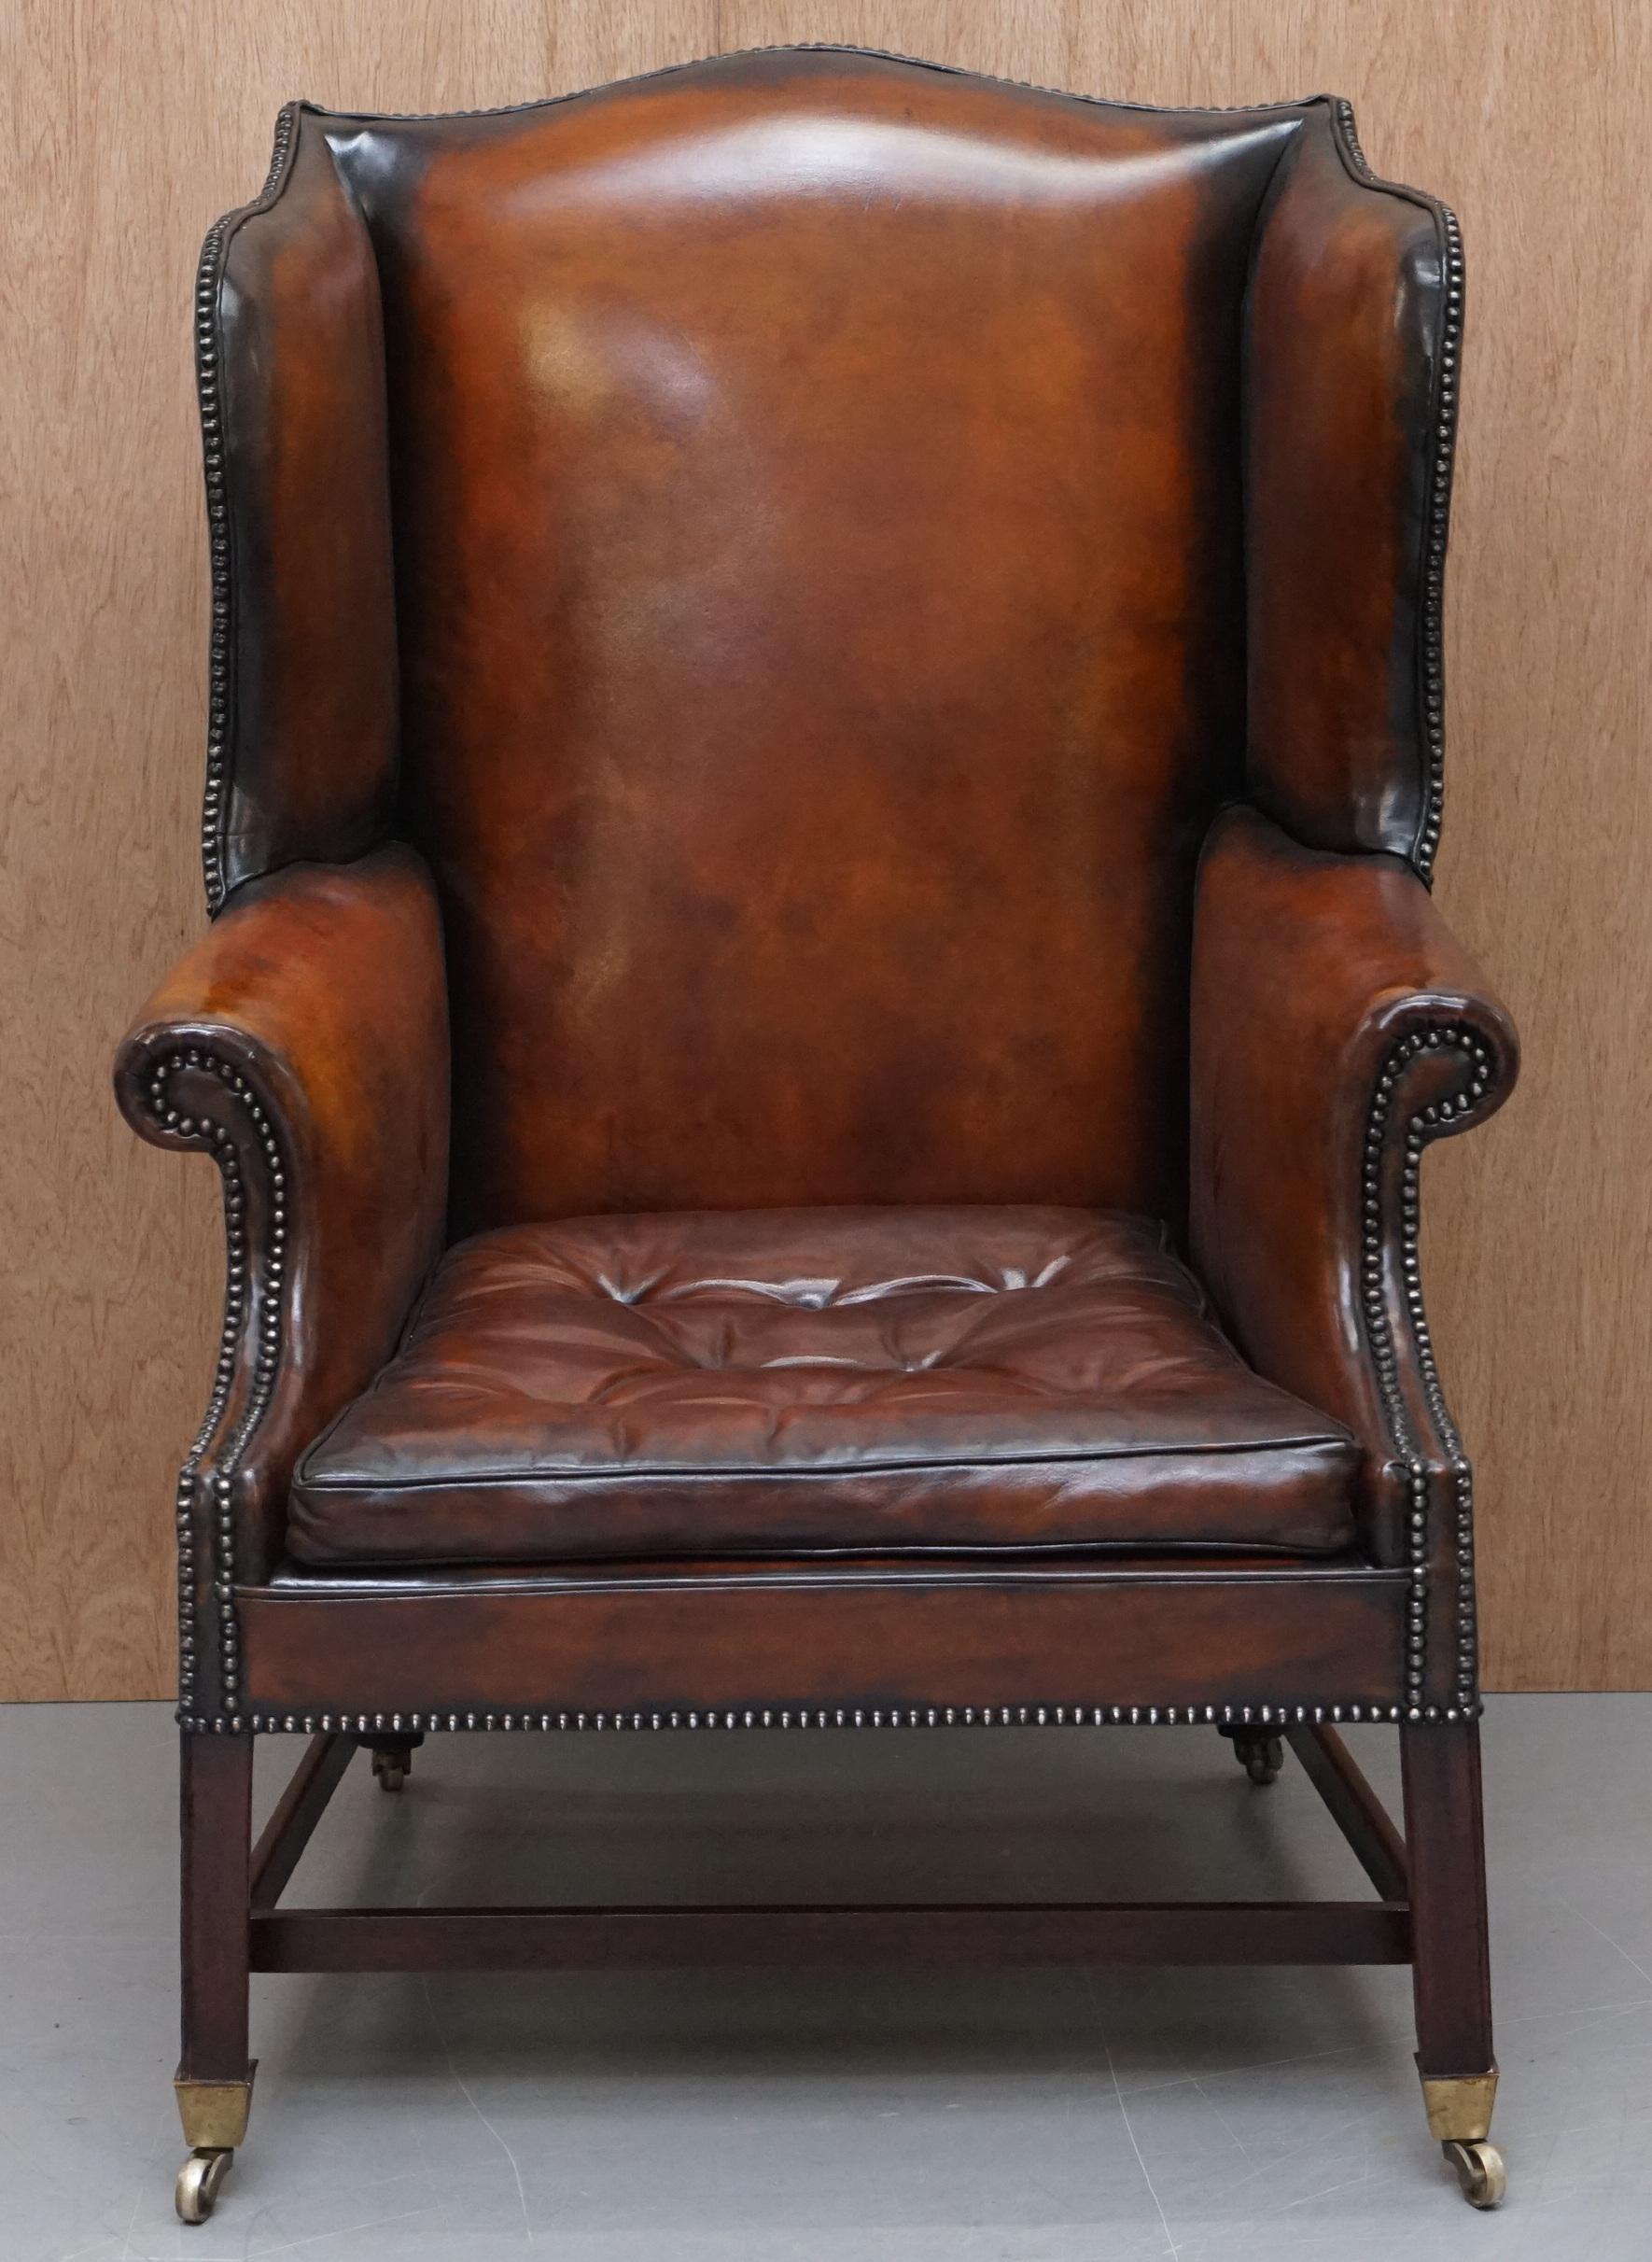 We are is delighted to offer for sale this stunning fully restored cigar brown hand dyed leather Victorian wingback armchair with Thomas Chippendale floating button cushion 

A very good looking and nicely refurbished piece. This is an original